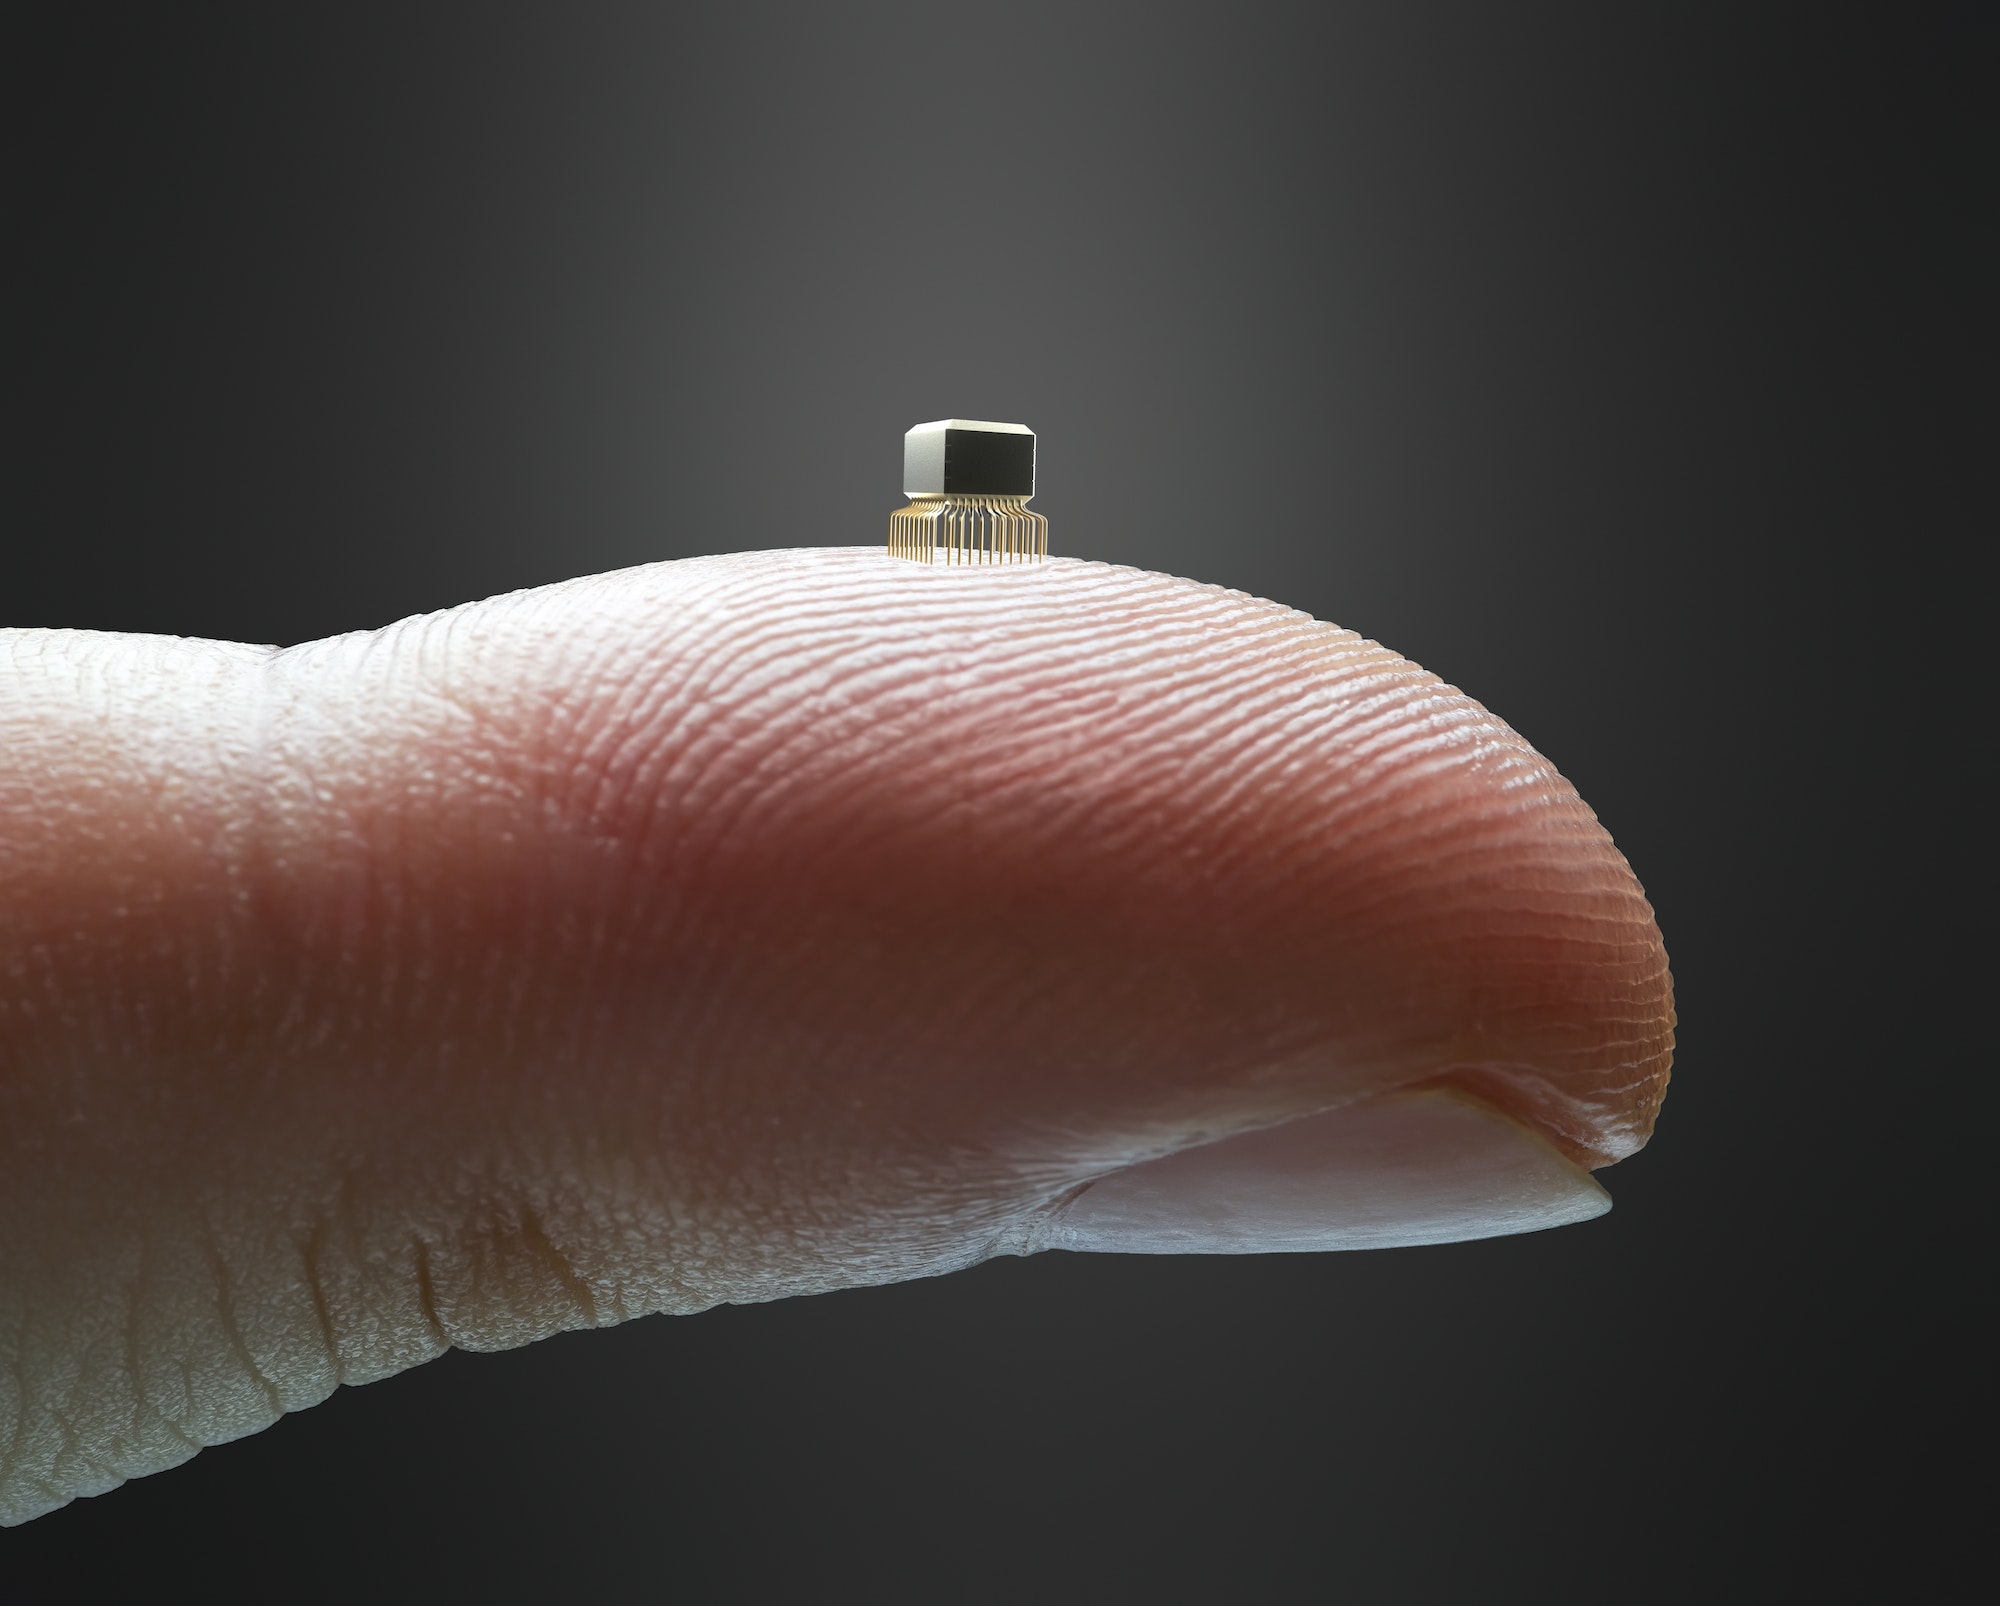 Science And Technology On The Fingertip